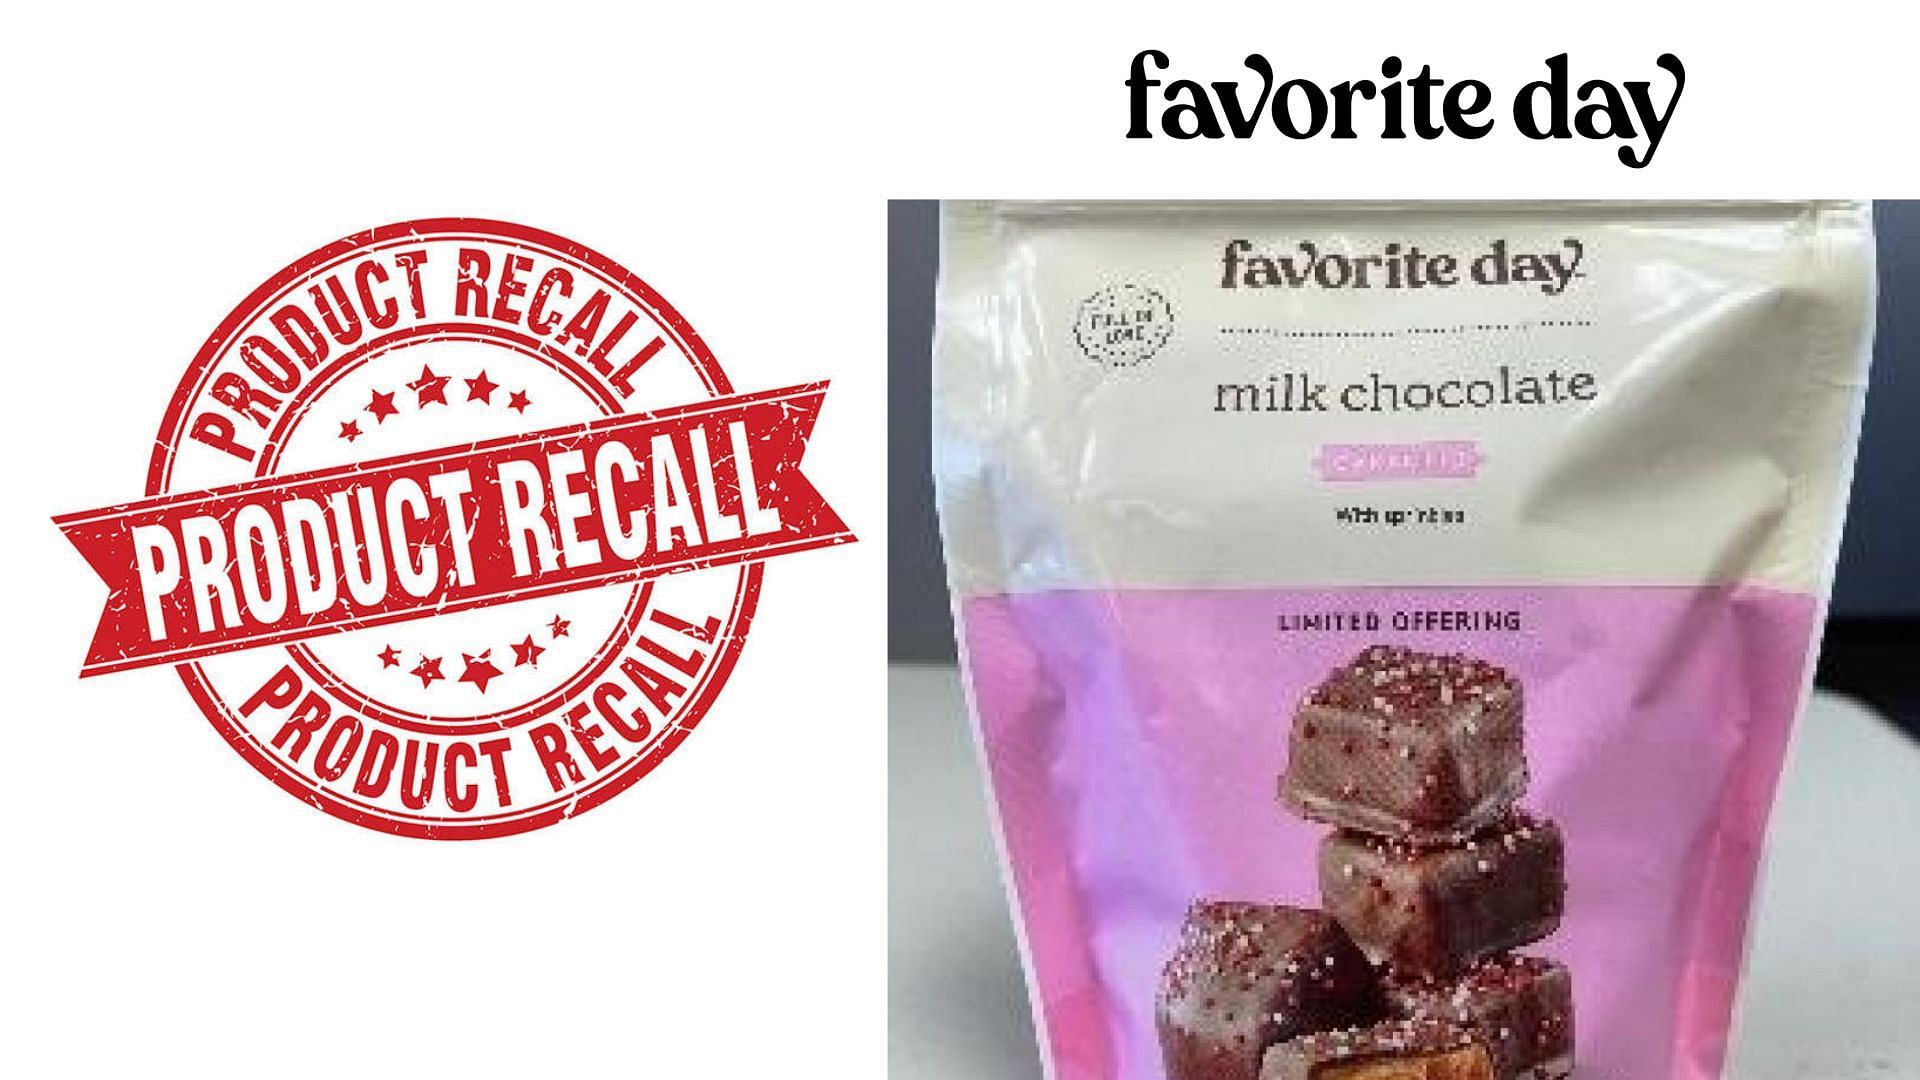 Silvestri Sweets Inc. issues a nationwide recall for Favorite Day branded Valentine